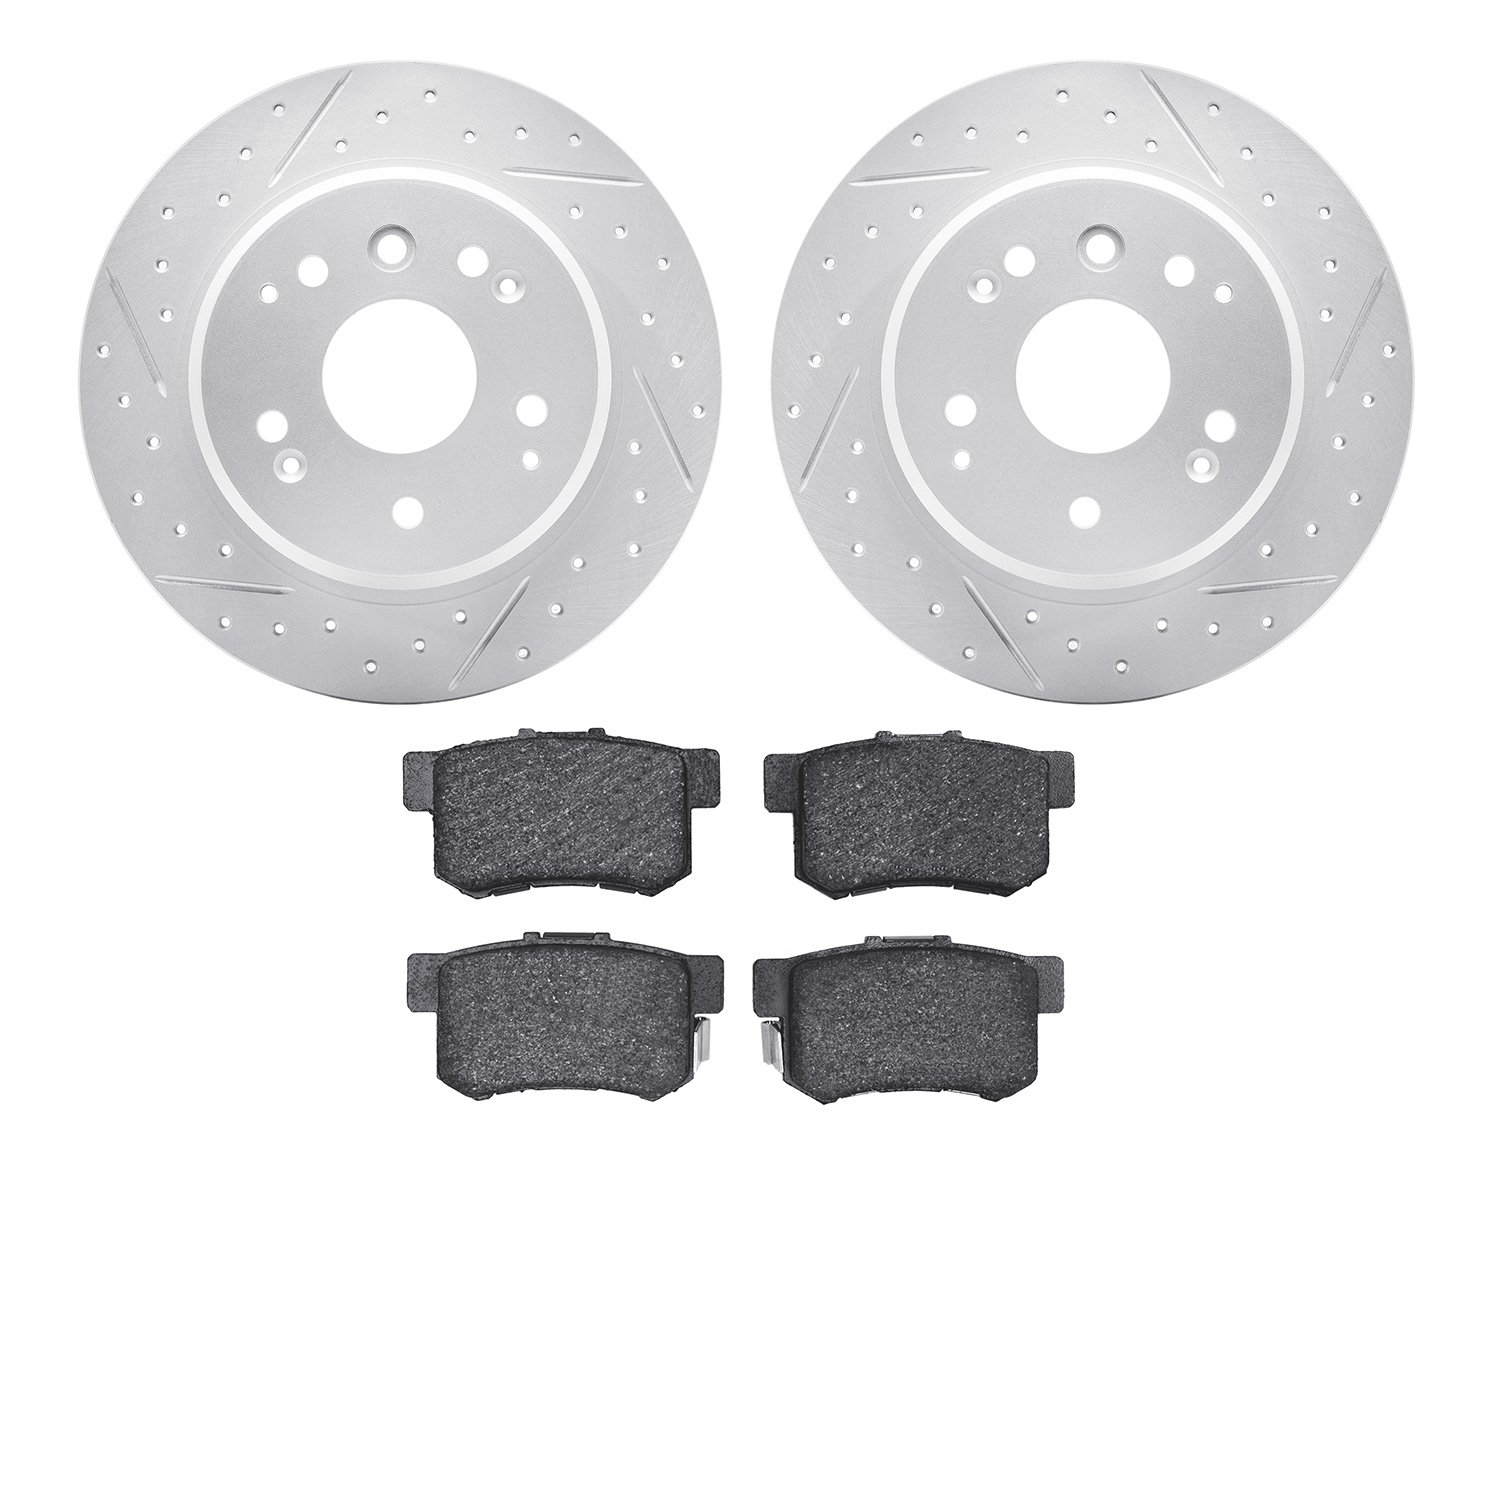 2502-58011 Geoperformance Drilled/Slotted Rotors w/5000 Advanced Brake Pads Kit, 2004-2008 Acura/Honda, Position: Rear